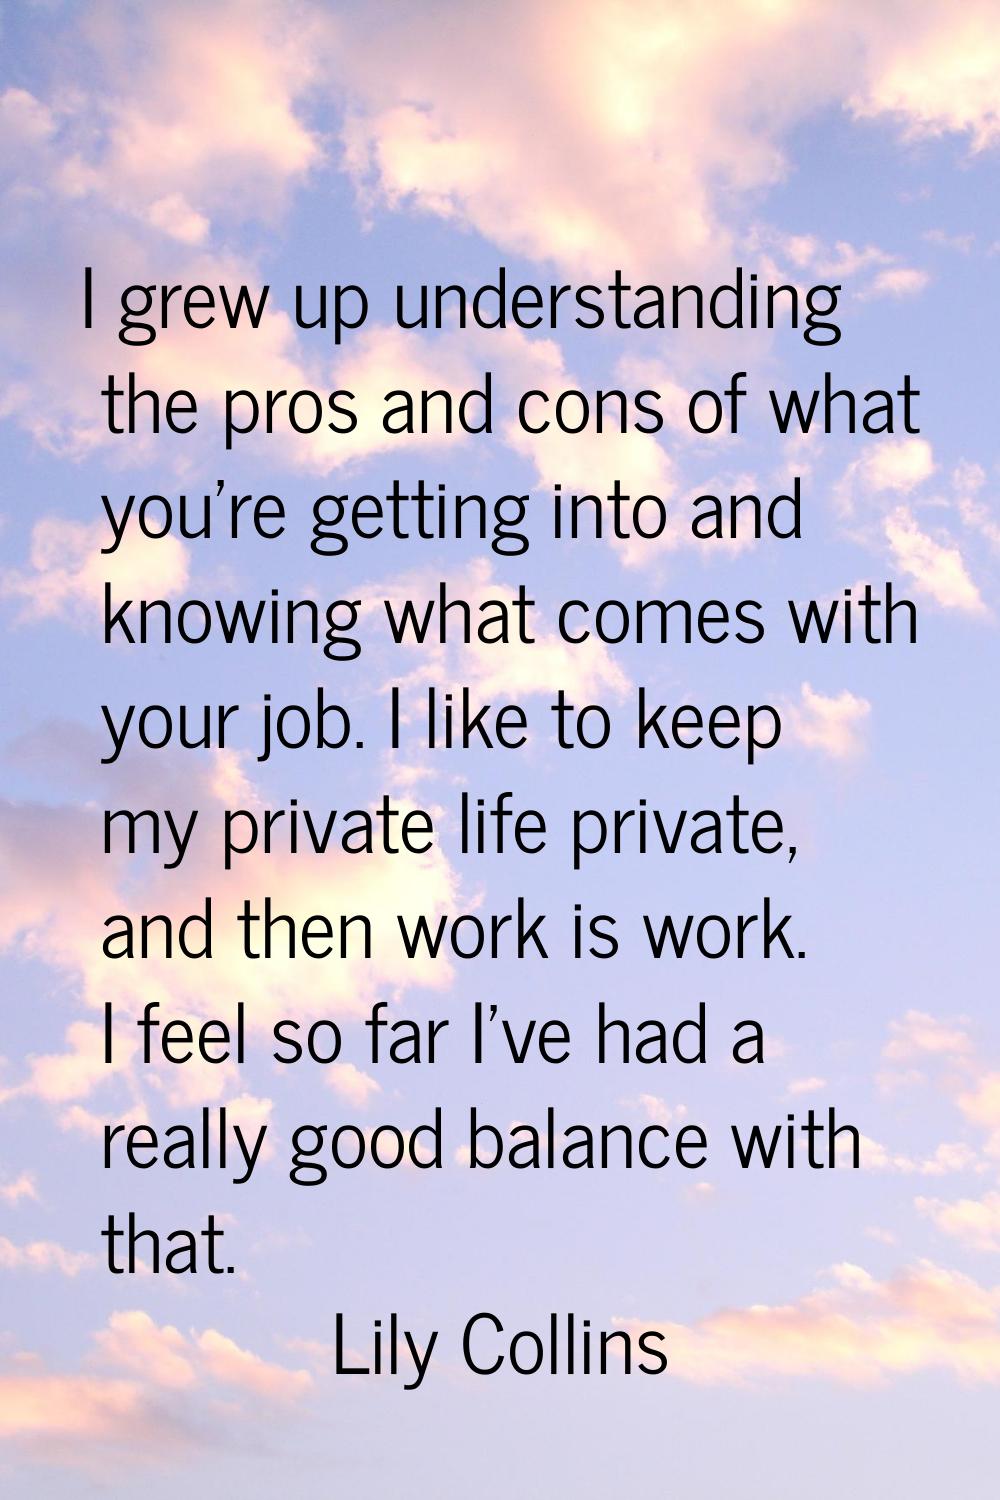 I grew up understanding the pros and cons of what you're getting into and knowing what comes with y